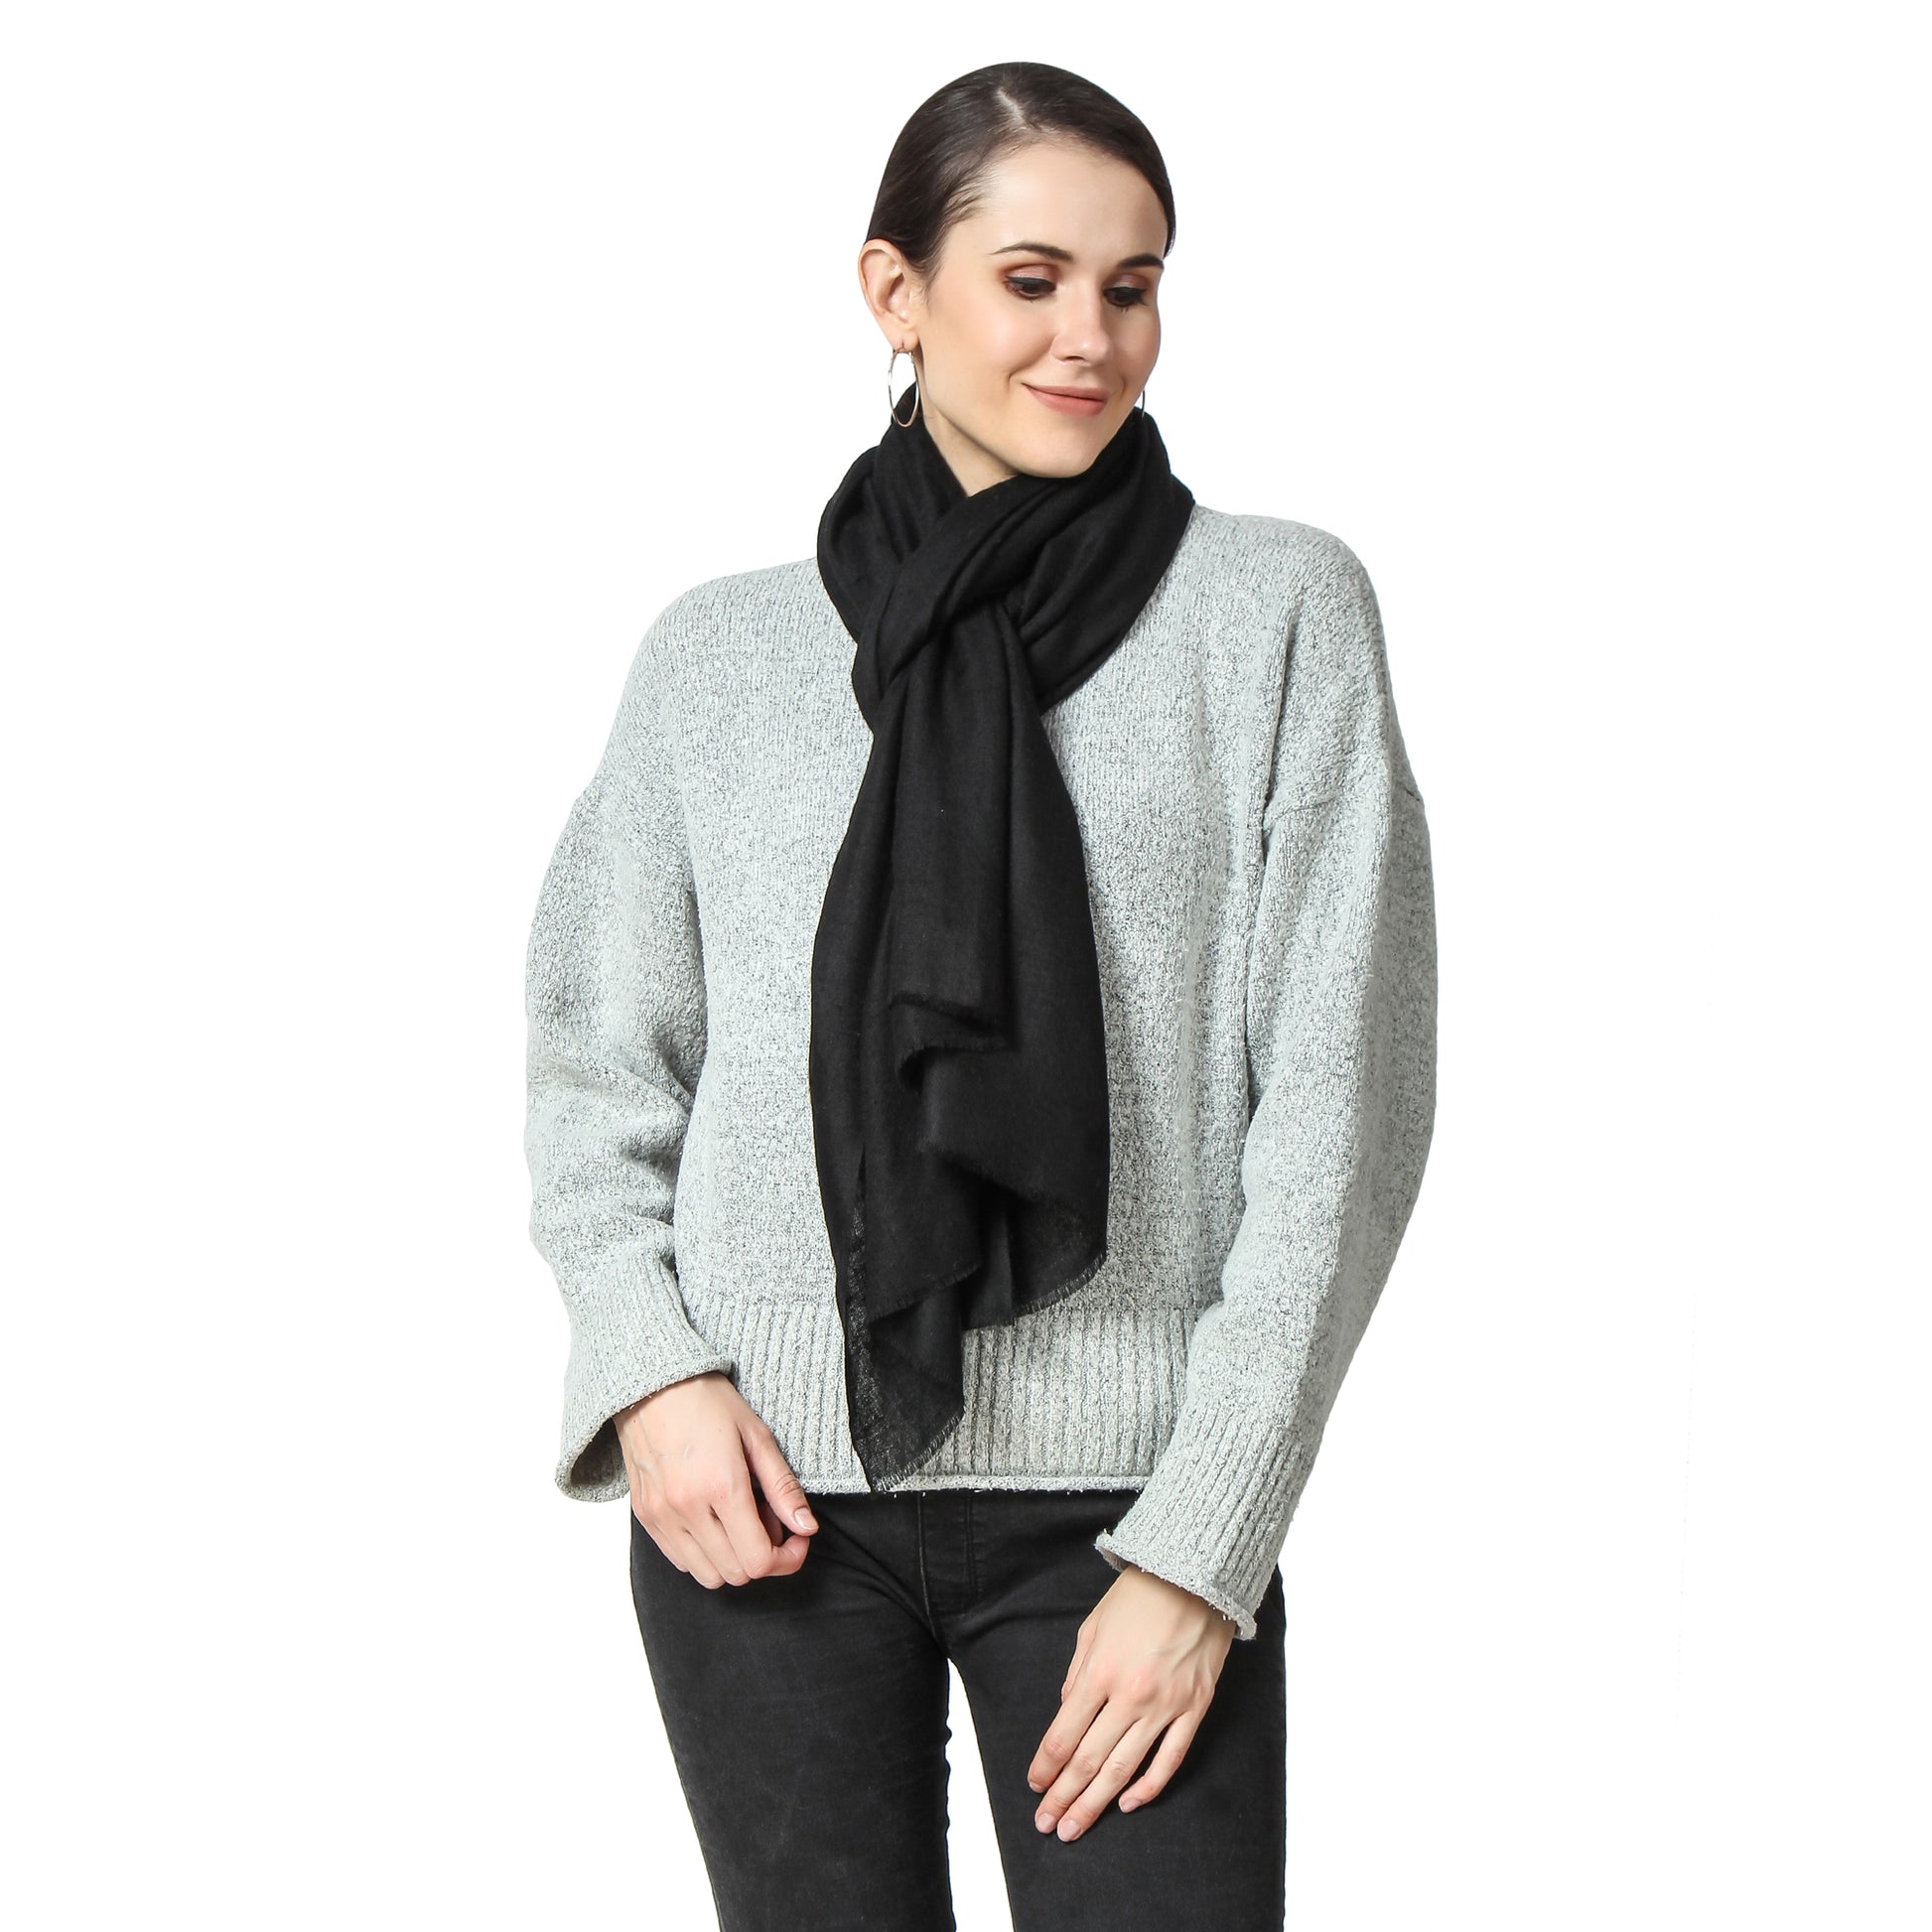 Image of a woman wearing a black cashmere scarf around her neck, knotted in a stylish and elegant way. The knot is positioned off-center and adds a touch of sophistication to the woman's outfit. The woman's expression is confident and composed, with a subtle smile on her face.